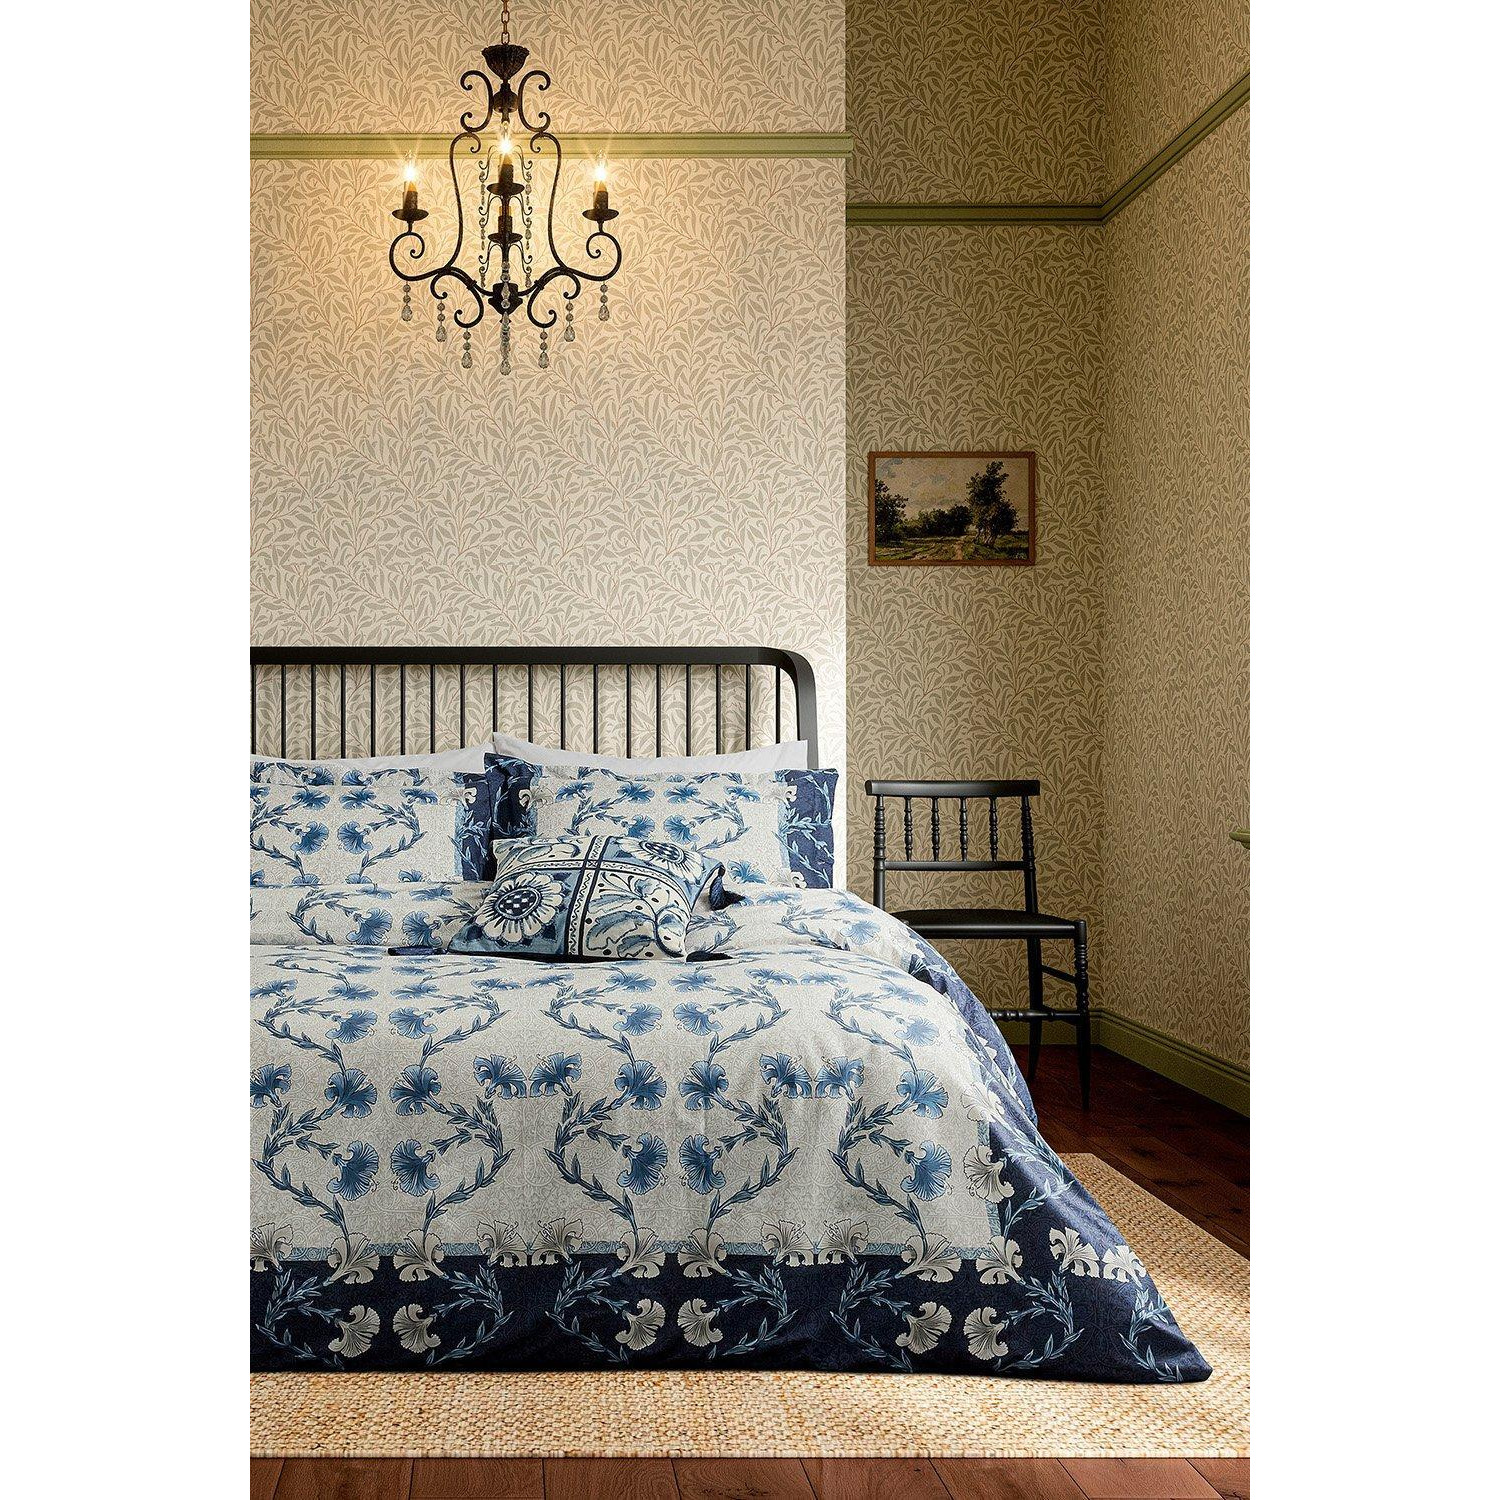 'Scrolling Carnation' Cotton Percale Duvet Cover Set - image 1